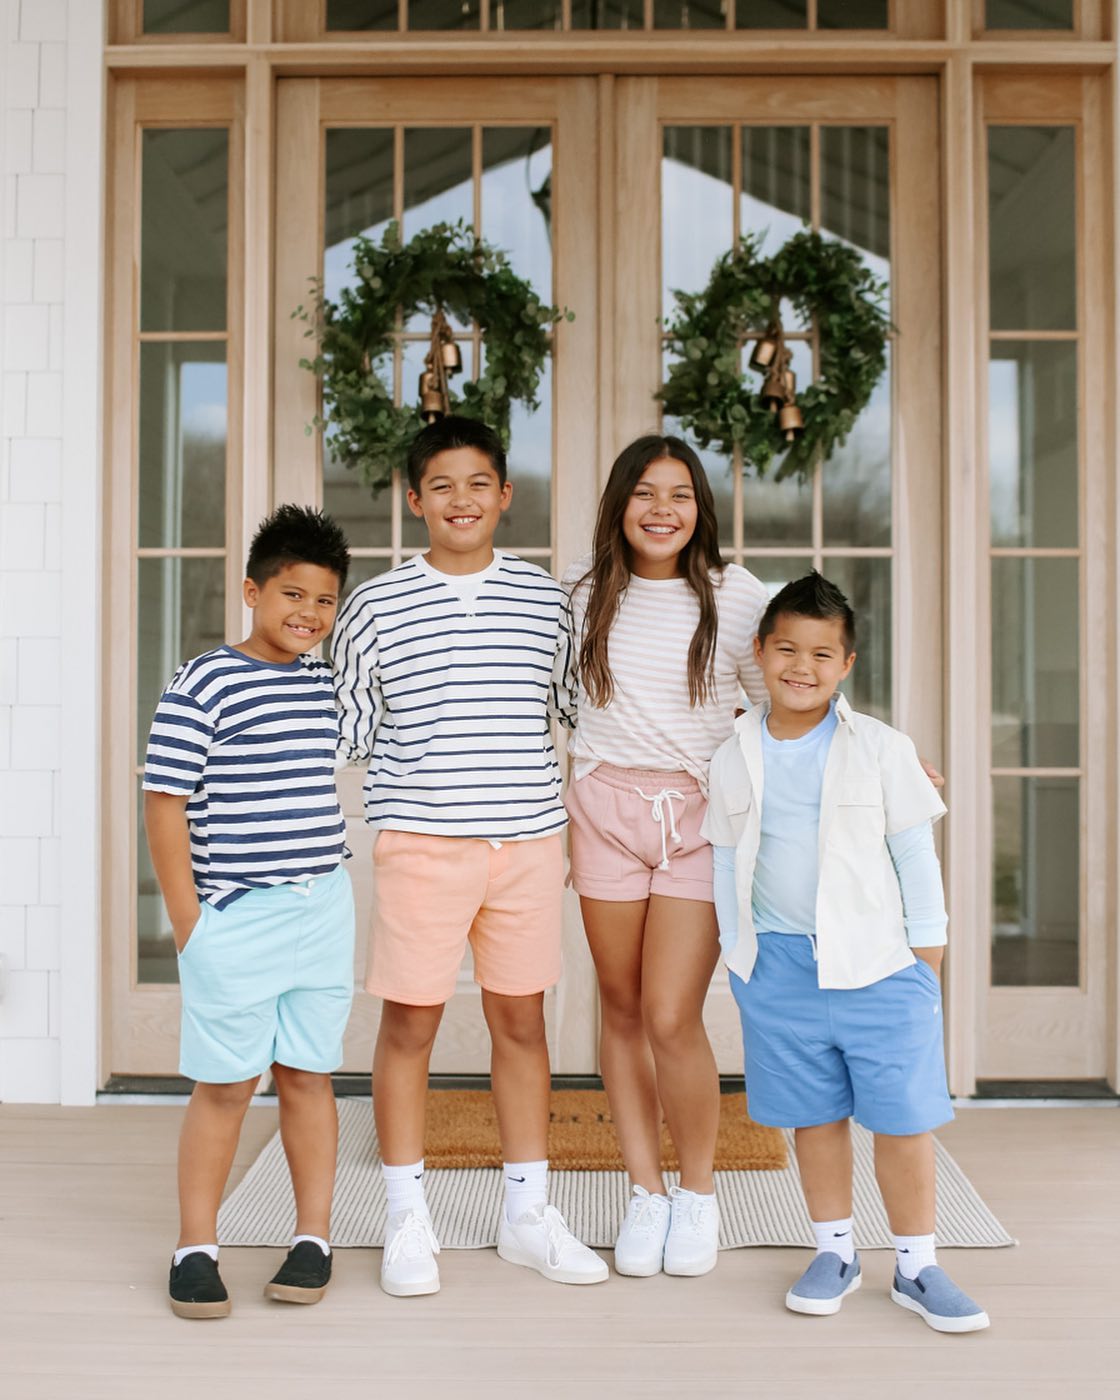 I am loving all the spring pieces from the Free Assembly line at @walmartfashion !  #ad Most of the time you'll see my kids wearing athletic clothes, so I like how these pieces are stylish and comfortable!  So many fun spring colors, and you can never go wrong with a stripe pattern.  It gives any outfit a more preppy/dressed-up look. Check out the blog for links and more images!  #FreeAssembly #WalmartFashion

#liketkit #LTKfamily #LTKSeasonal
@shop.ltk https://liketk.it/3DbvI